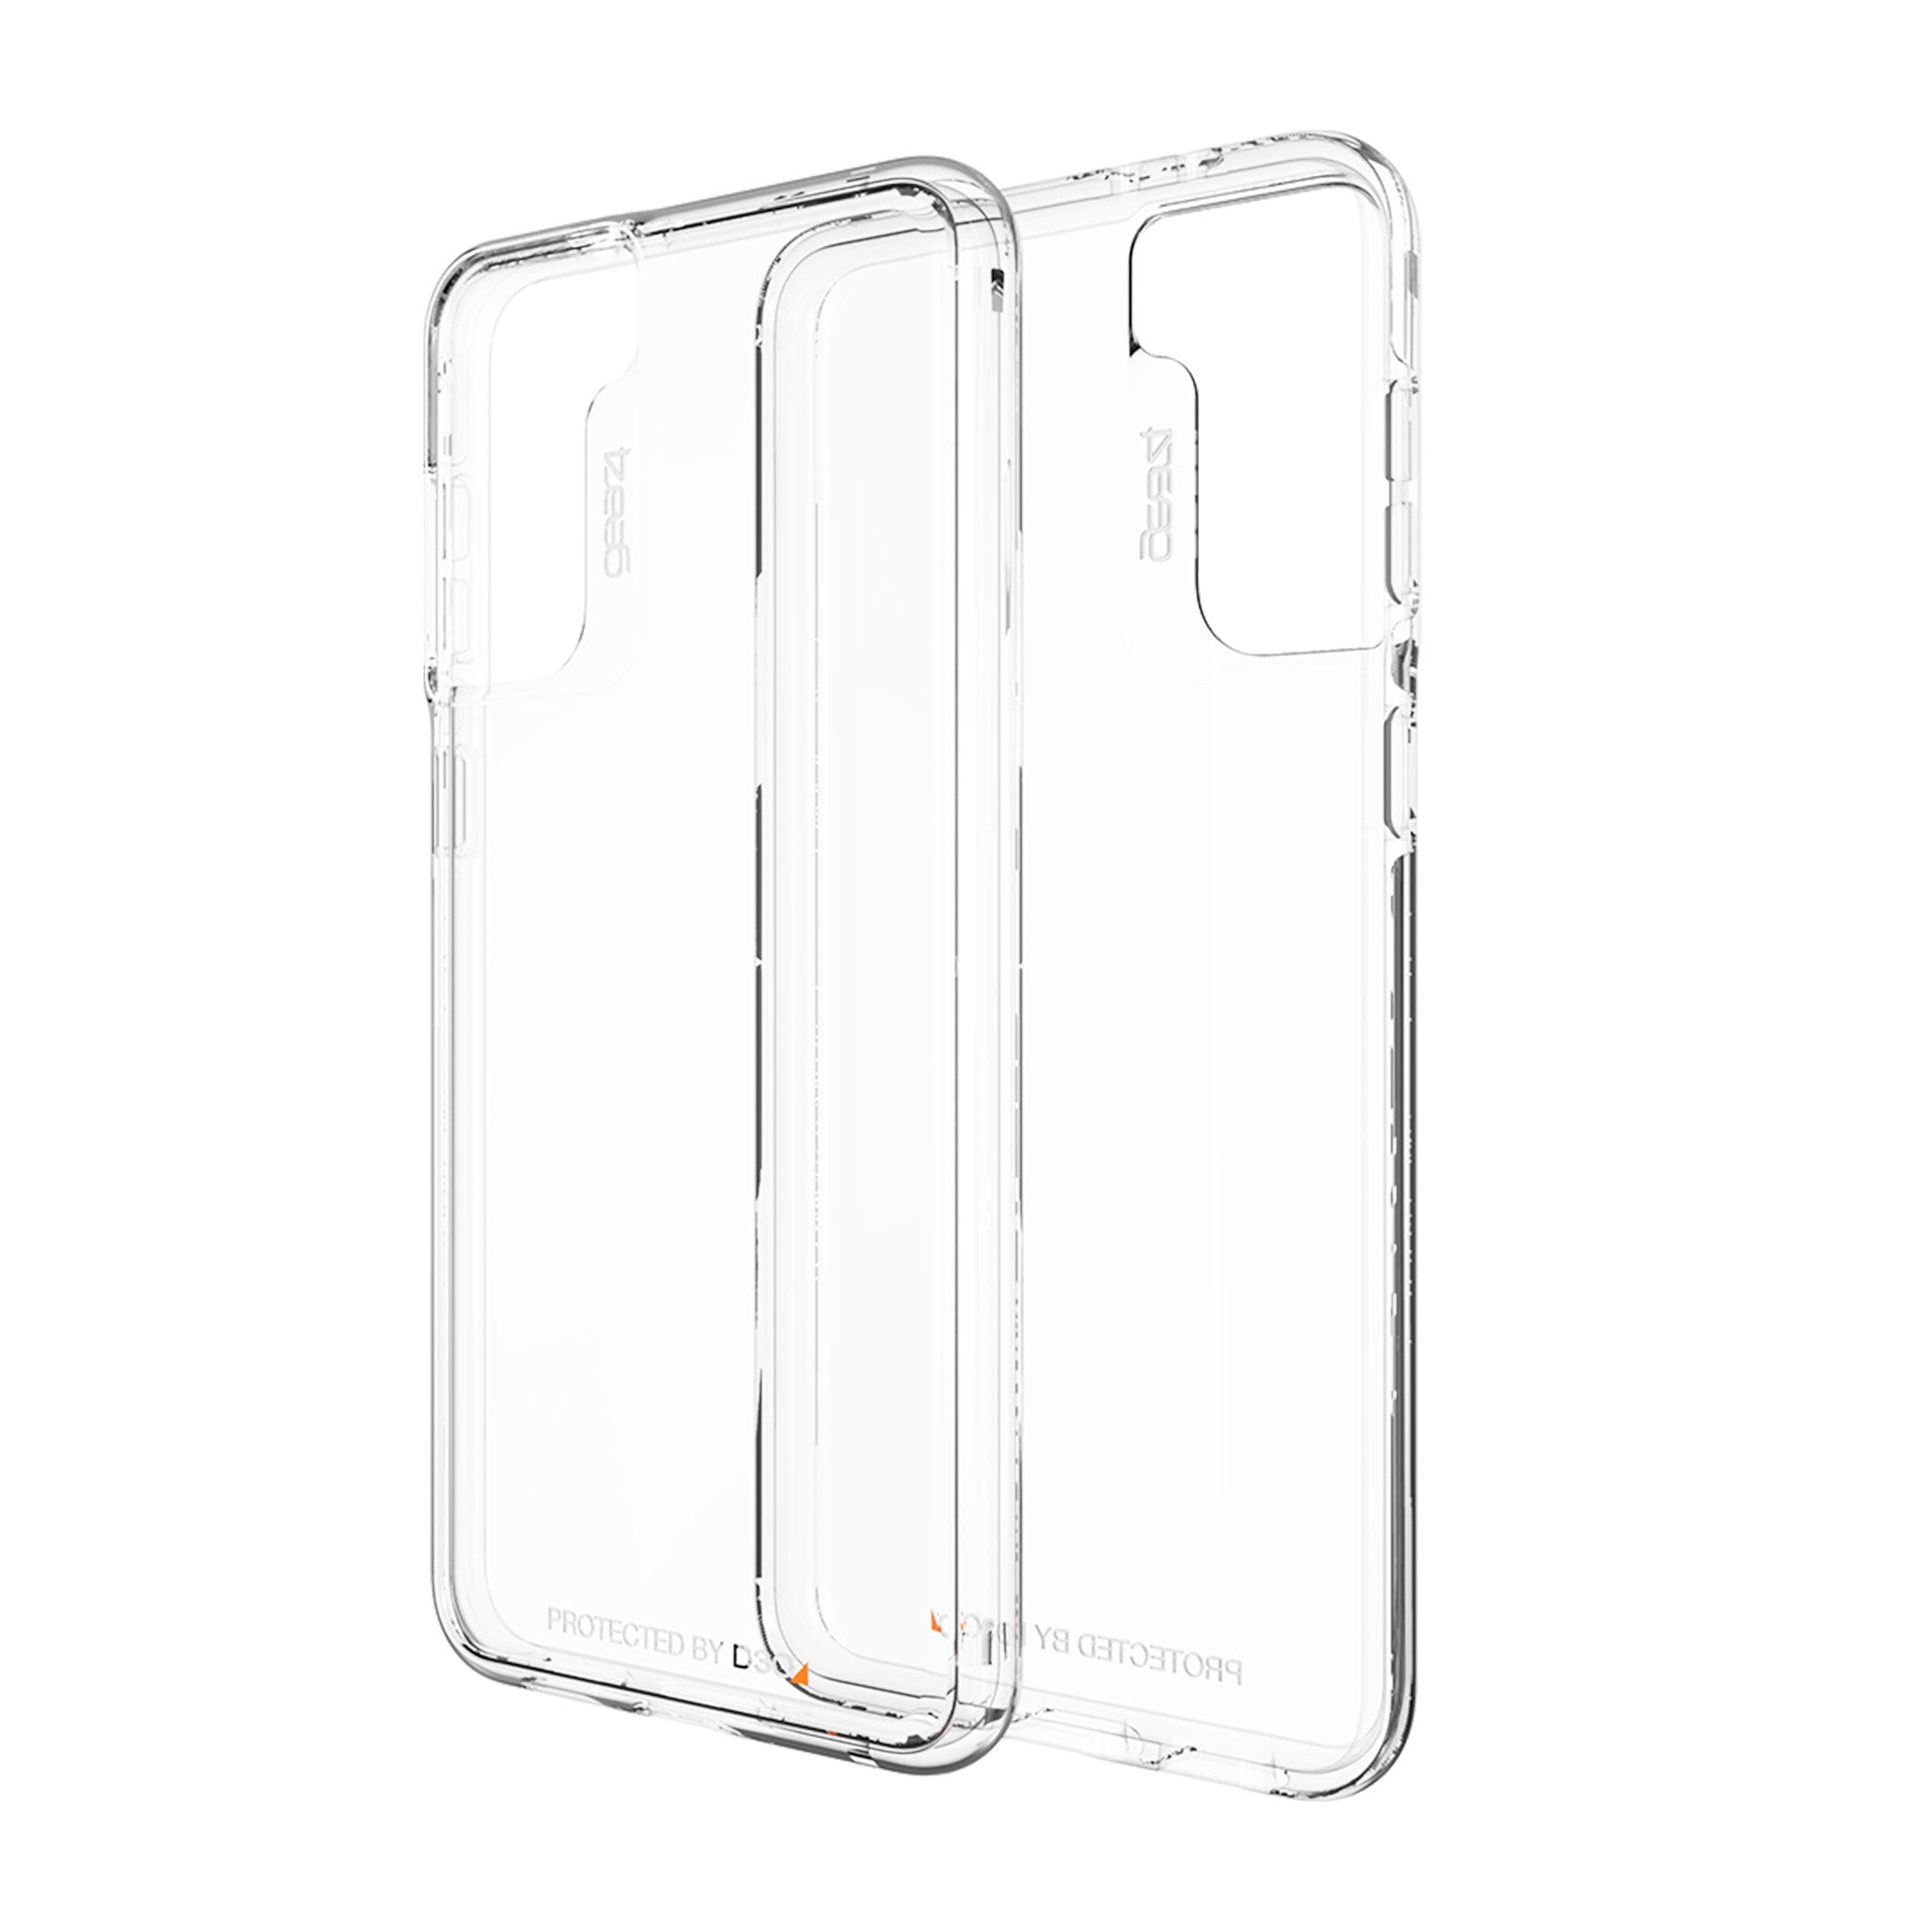 Gear4 - Crystal Palace Case For Samsung Galaxy S21 Plus 5g - Clear